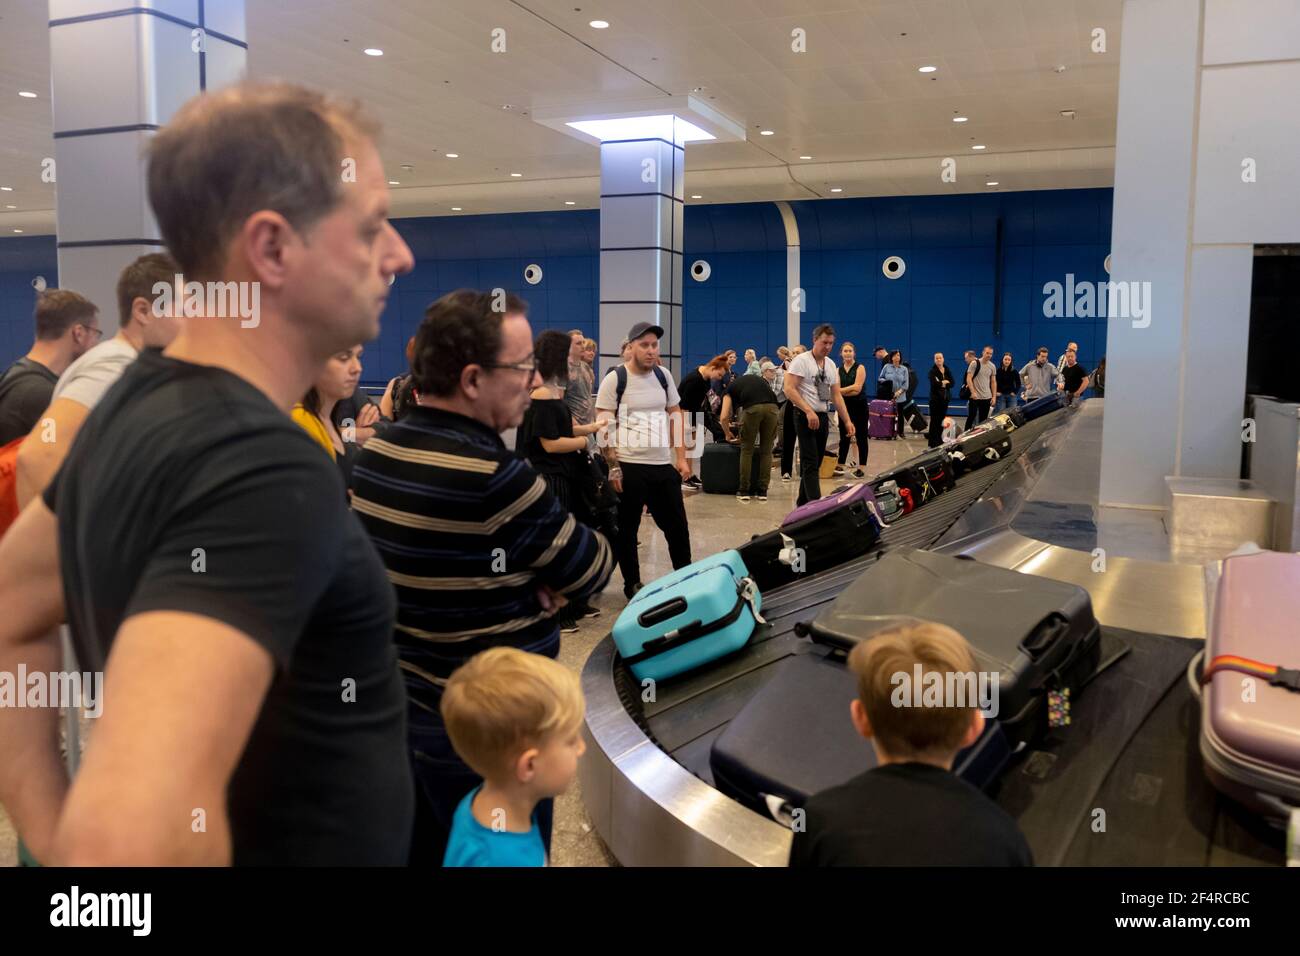 People are waiting for their luggage after landing. Stock Photo